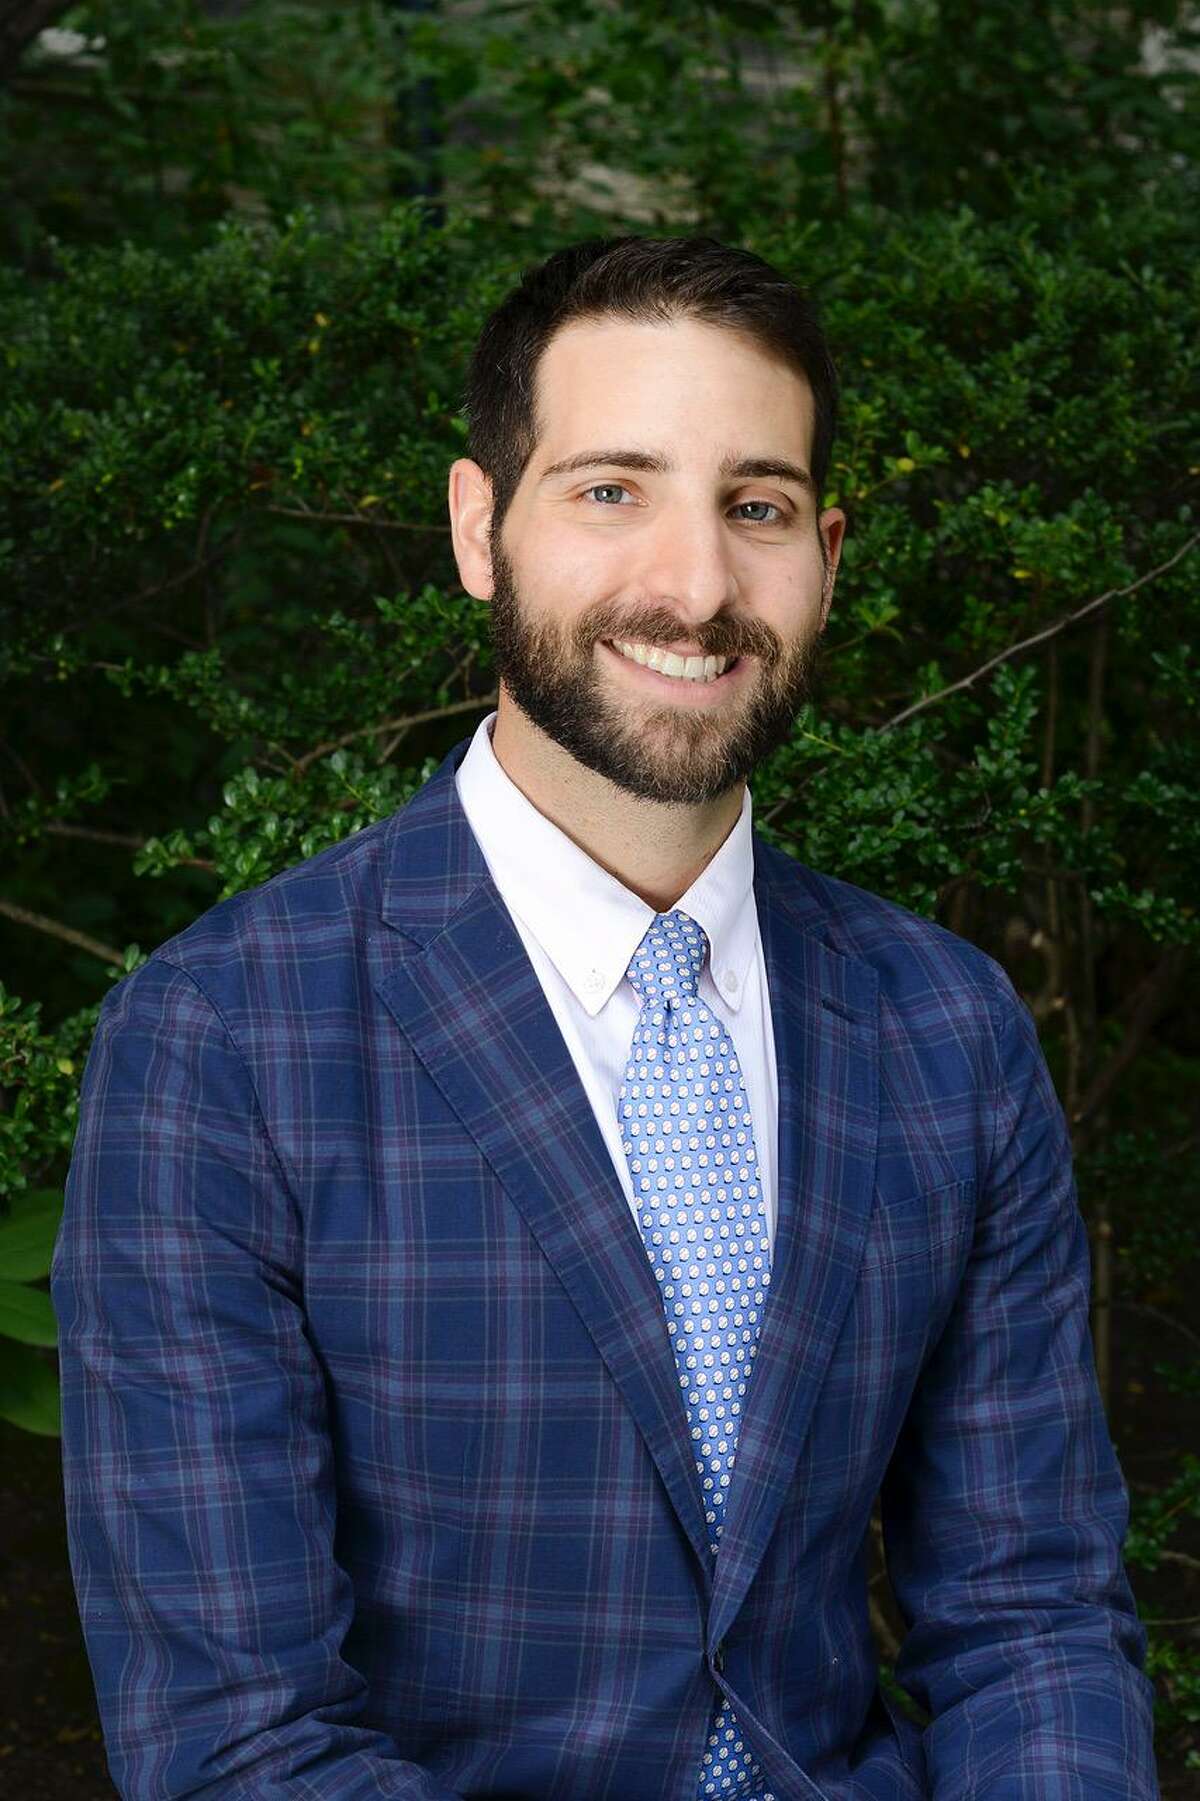 Dr. Josh Deitch will become the Head of Middle School at King School in Stamford, Conn. in July 2019.